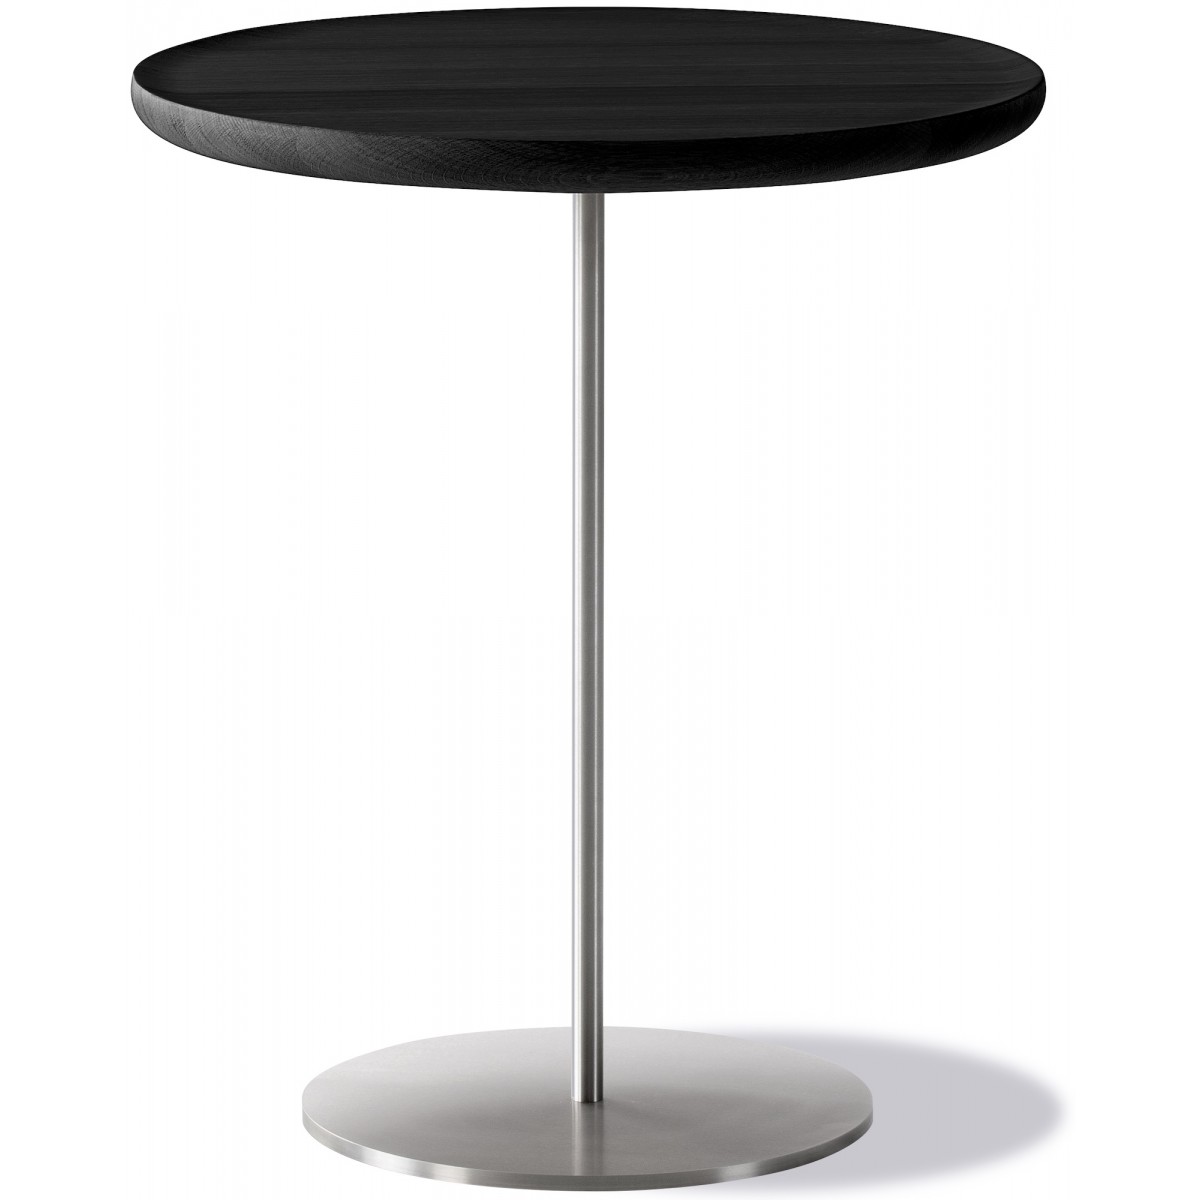 black lacquered oak / stainless steel, brushed - side table Pal 6755